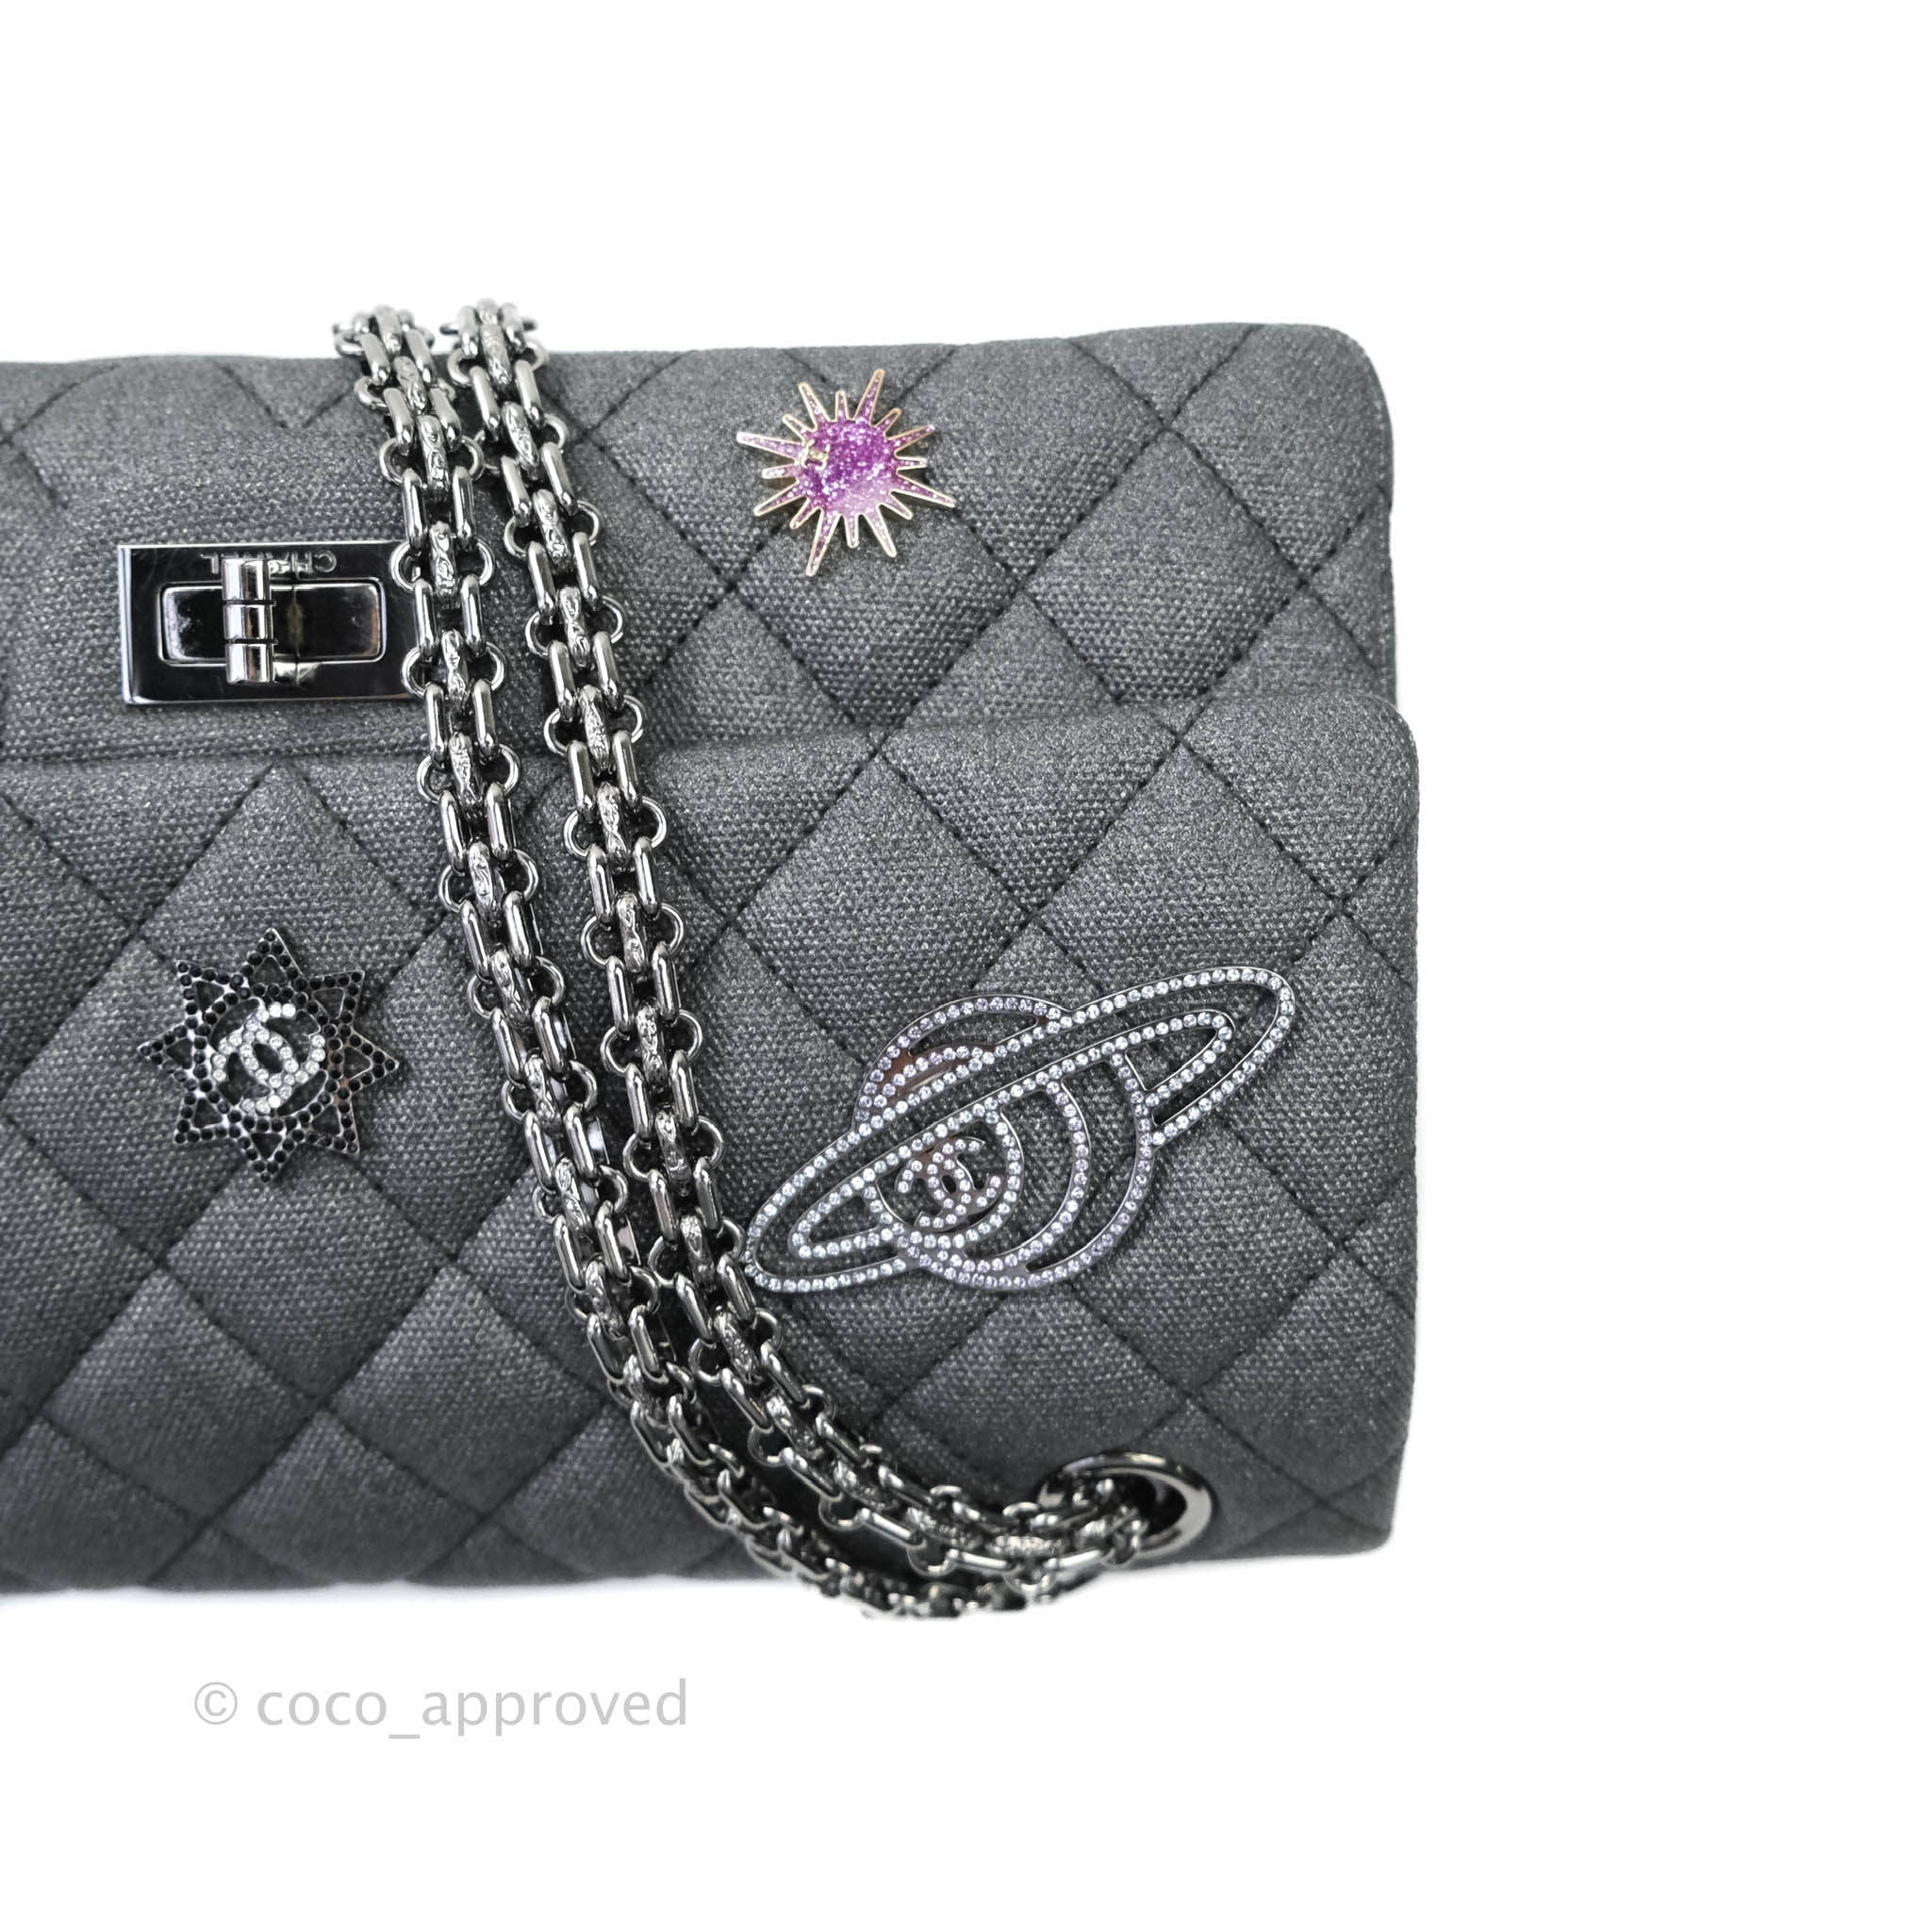 Chanel 2.55 Reissue Lucky Charms 225 Flap Iridescent Metallic Grey Can –  Coco Approved Studio